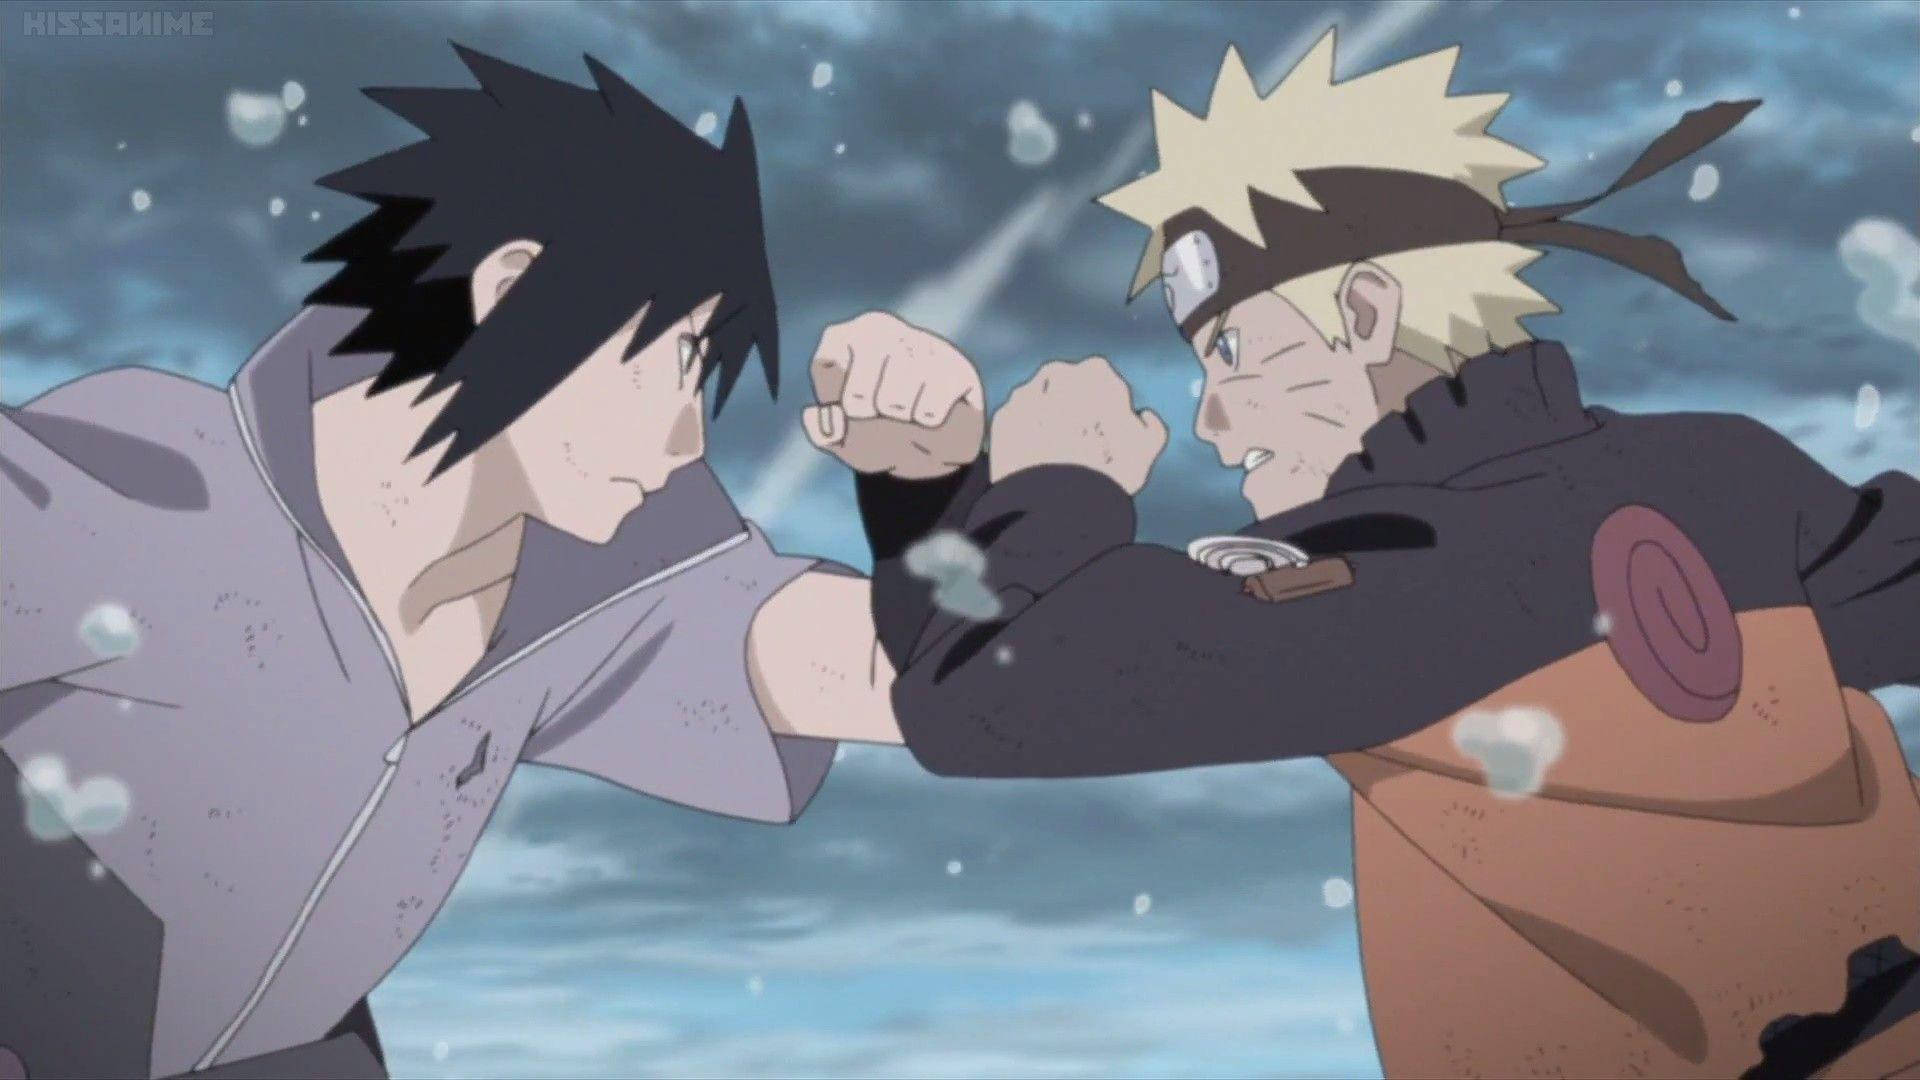 Naruto Shippuden 1920X1080 Wallpaper and Background Image